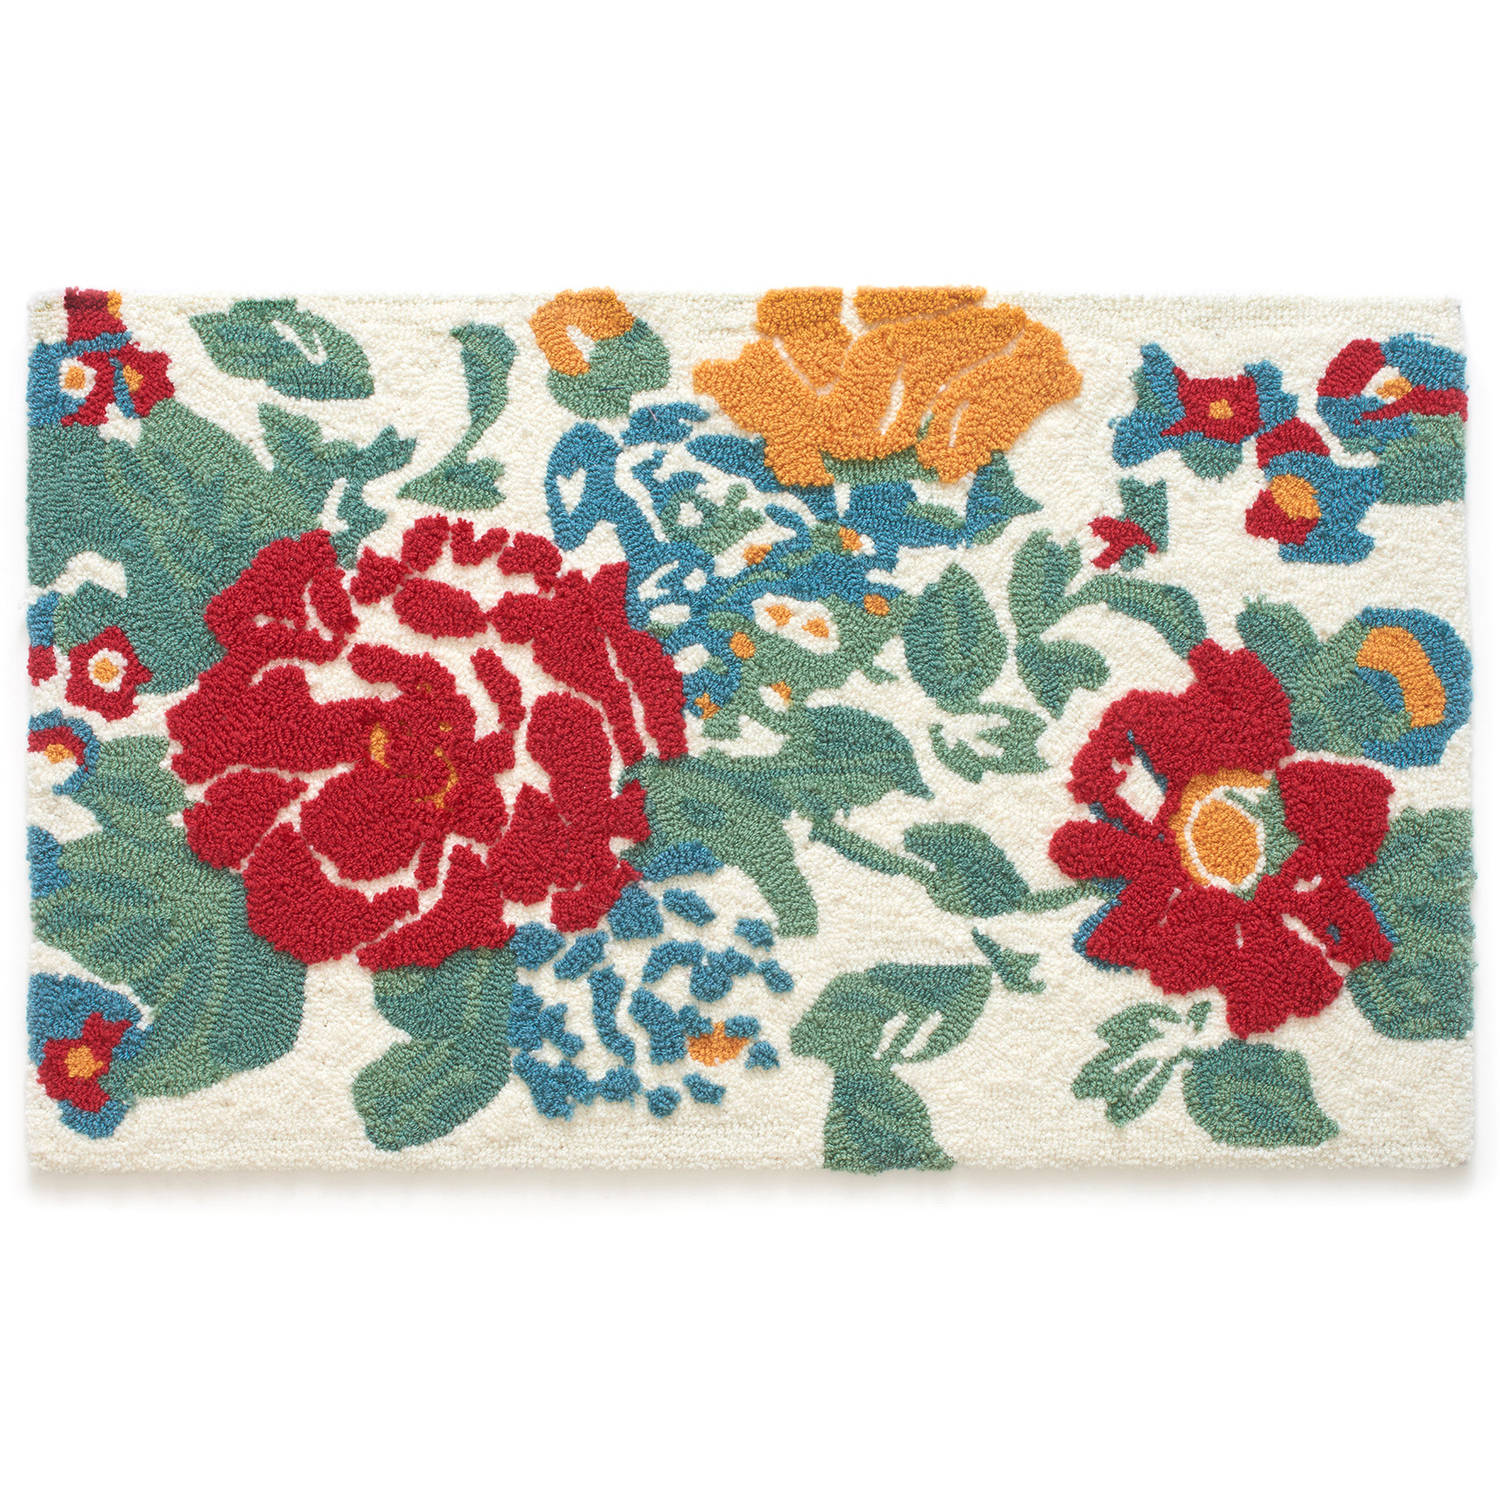 The Pioneer Woman Country Garden Rug, Multi-color, 18" x 30" - image 1 of 4